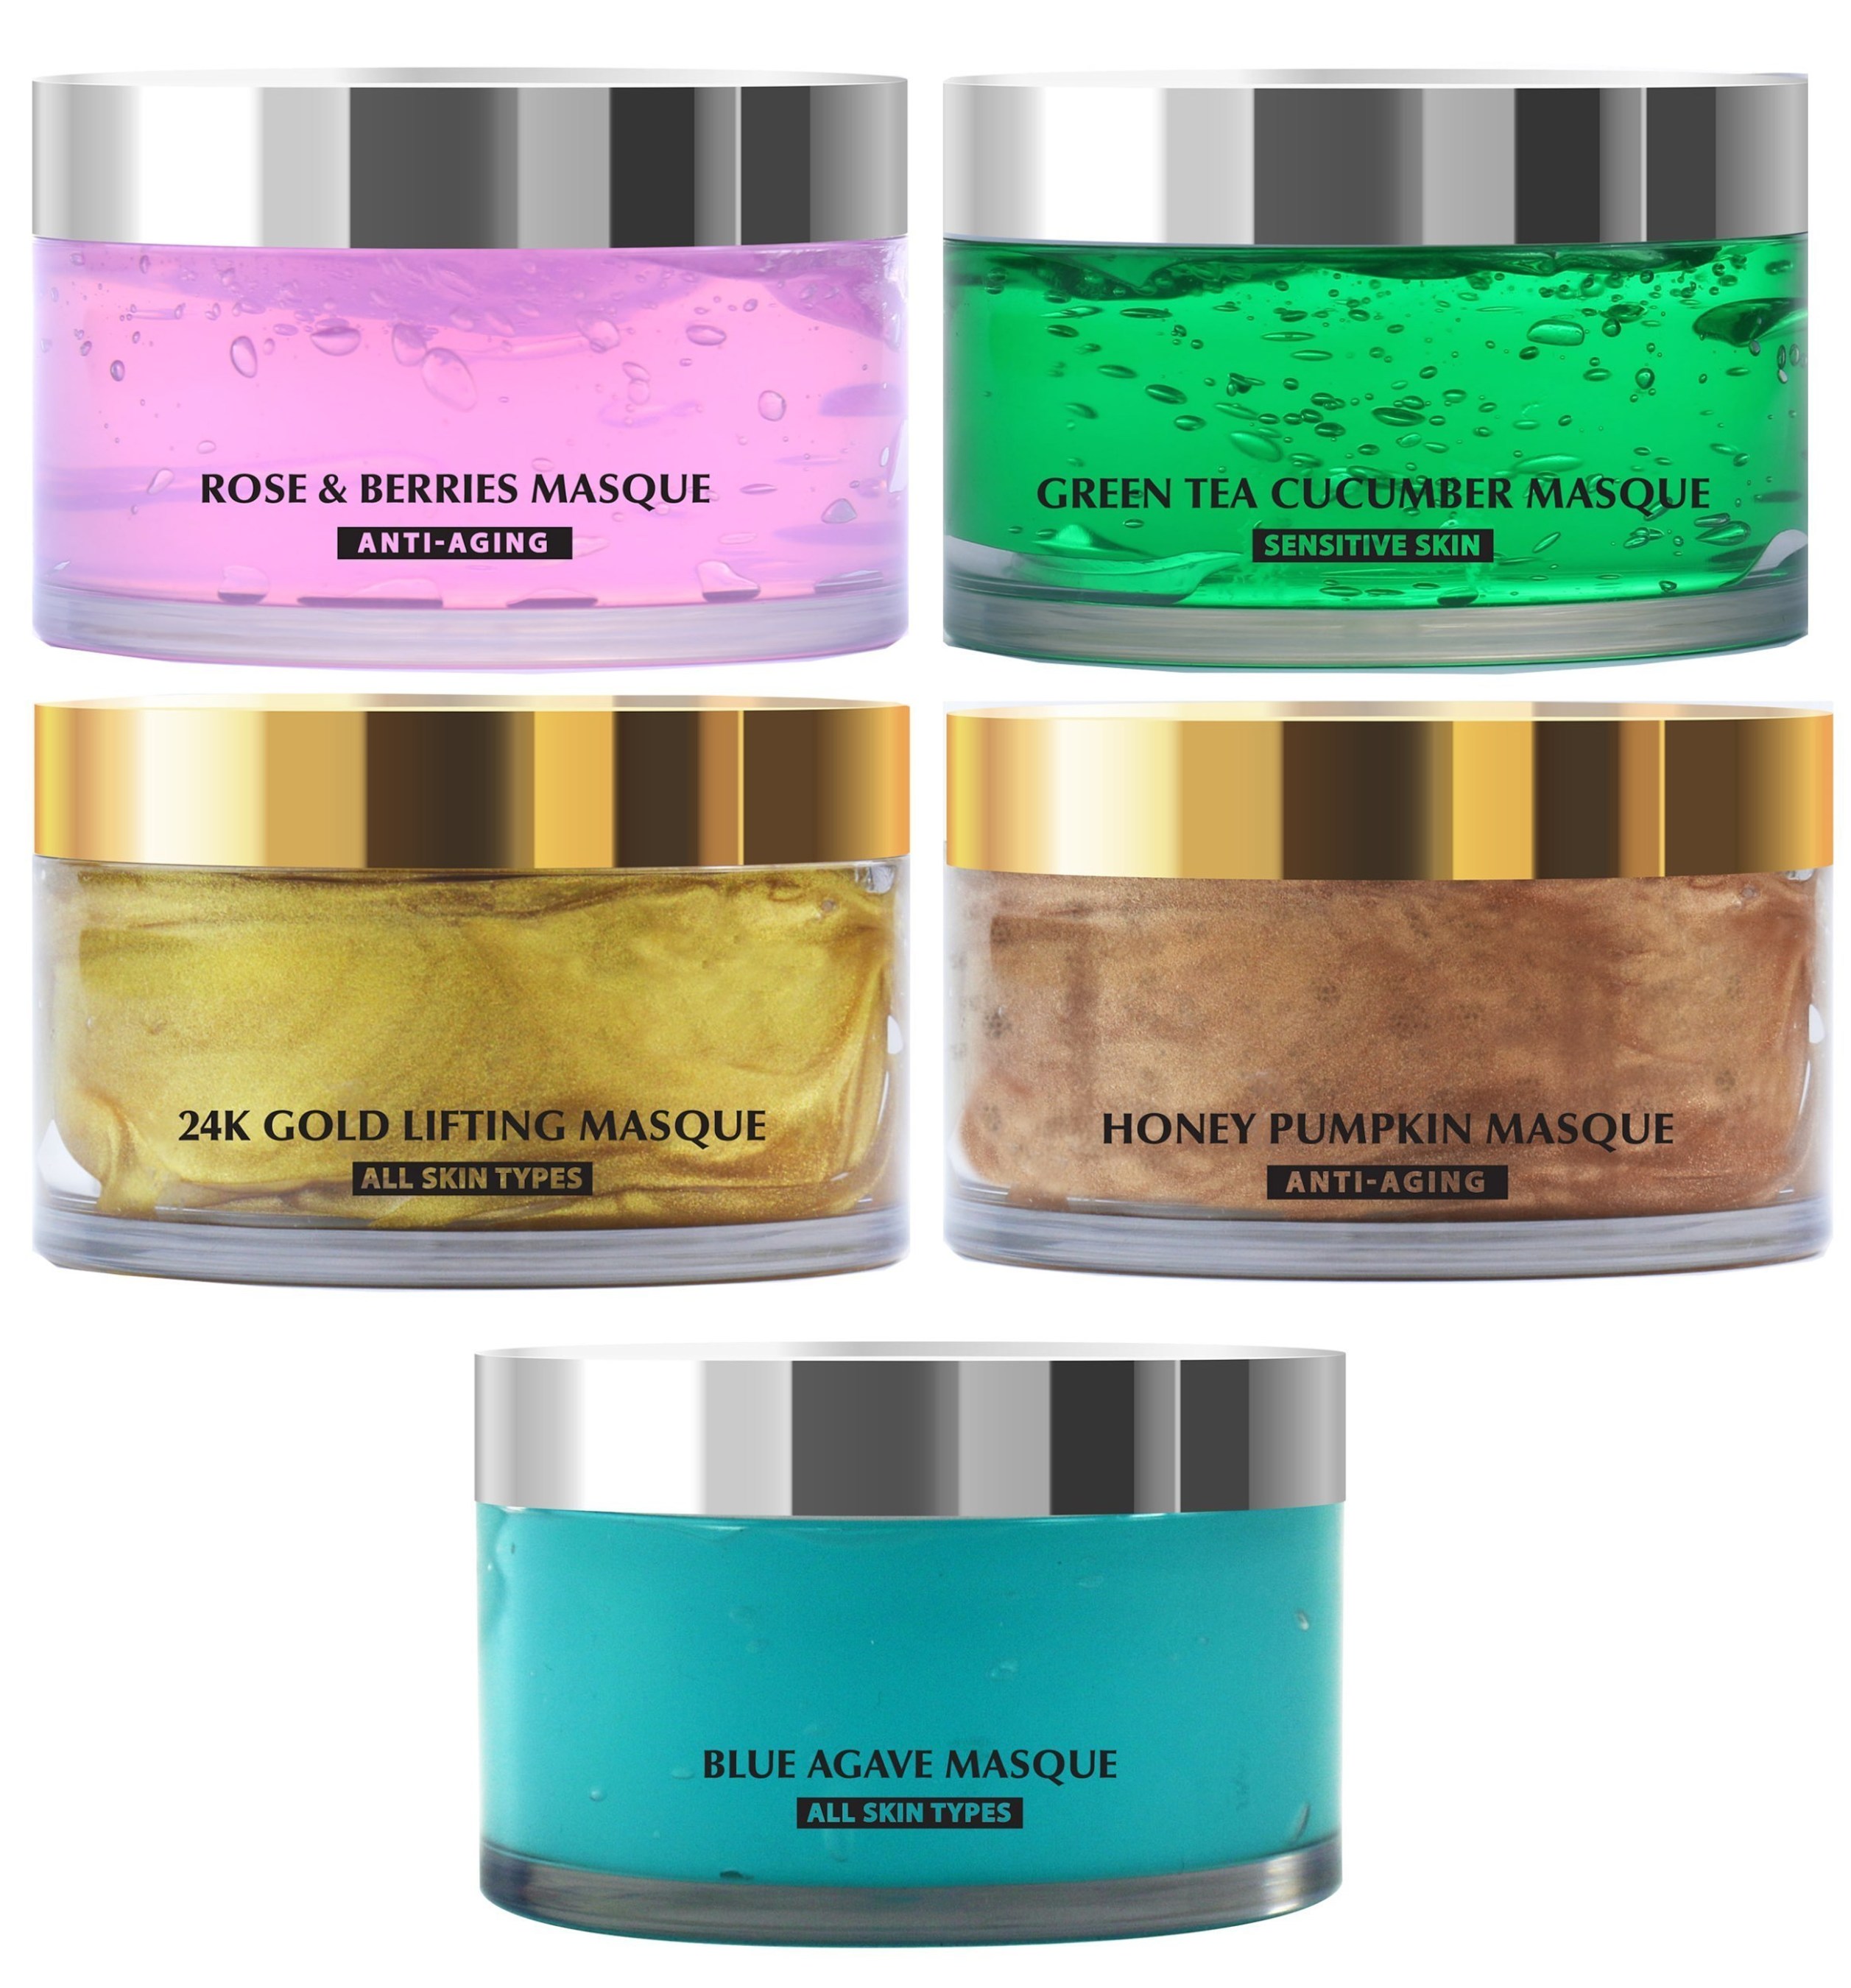 These facial masques are formulated to nourish, refine, and revive your skin. Now available for private labeling.